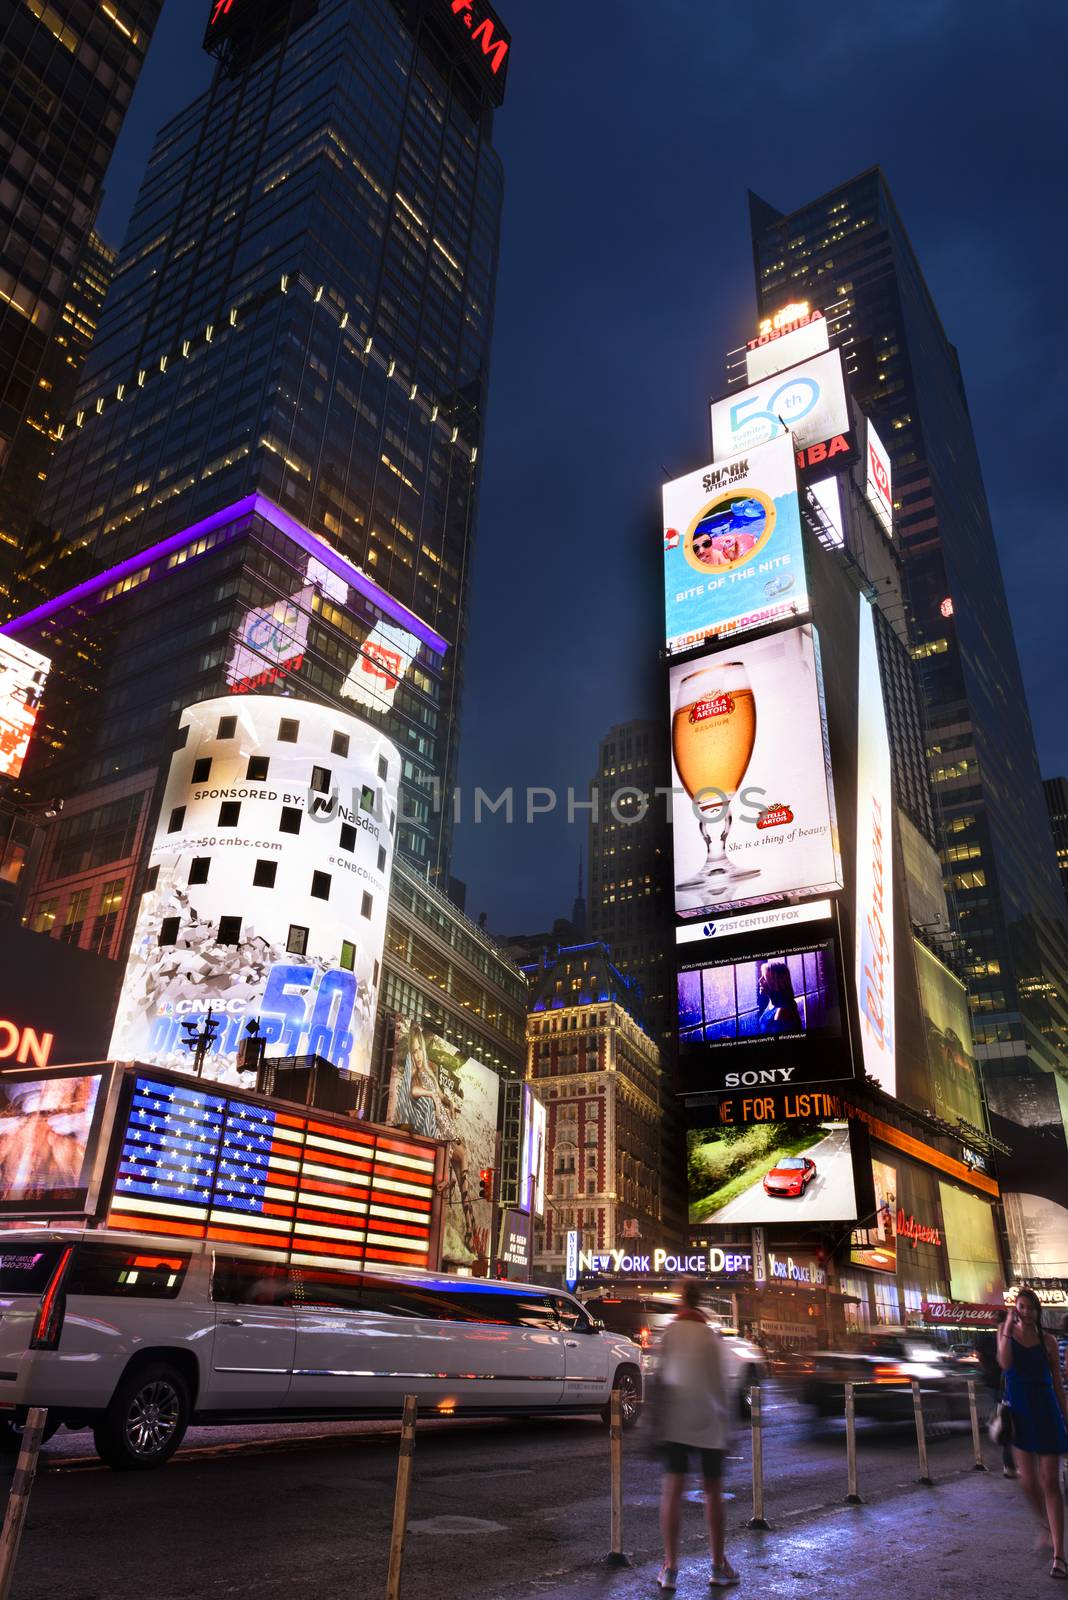 NEW YORK CITY -JULY 09: Times Square, featured with Broadway Theaters and animated LED signs, is a symbol of New York City and the United States, July 09, 2015 in Manhattan, New York City. USA.